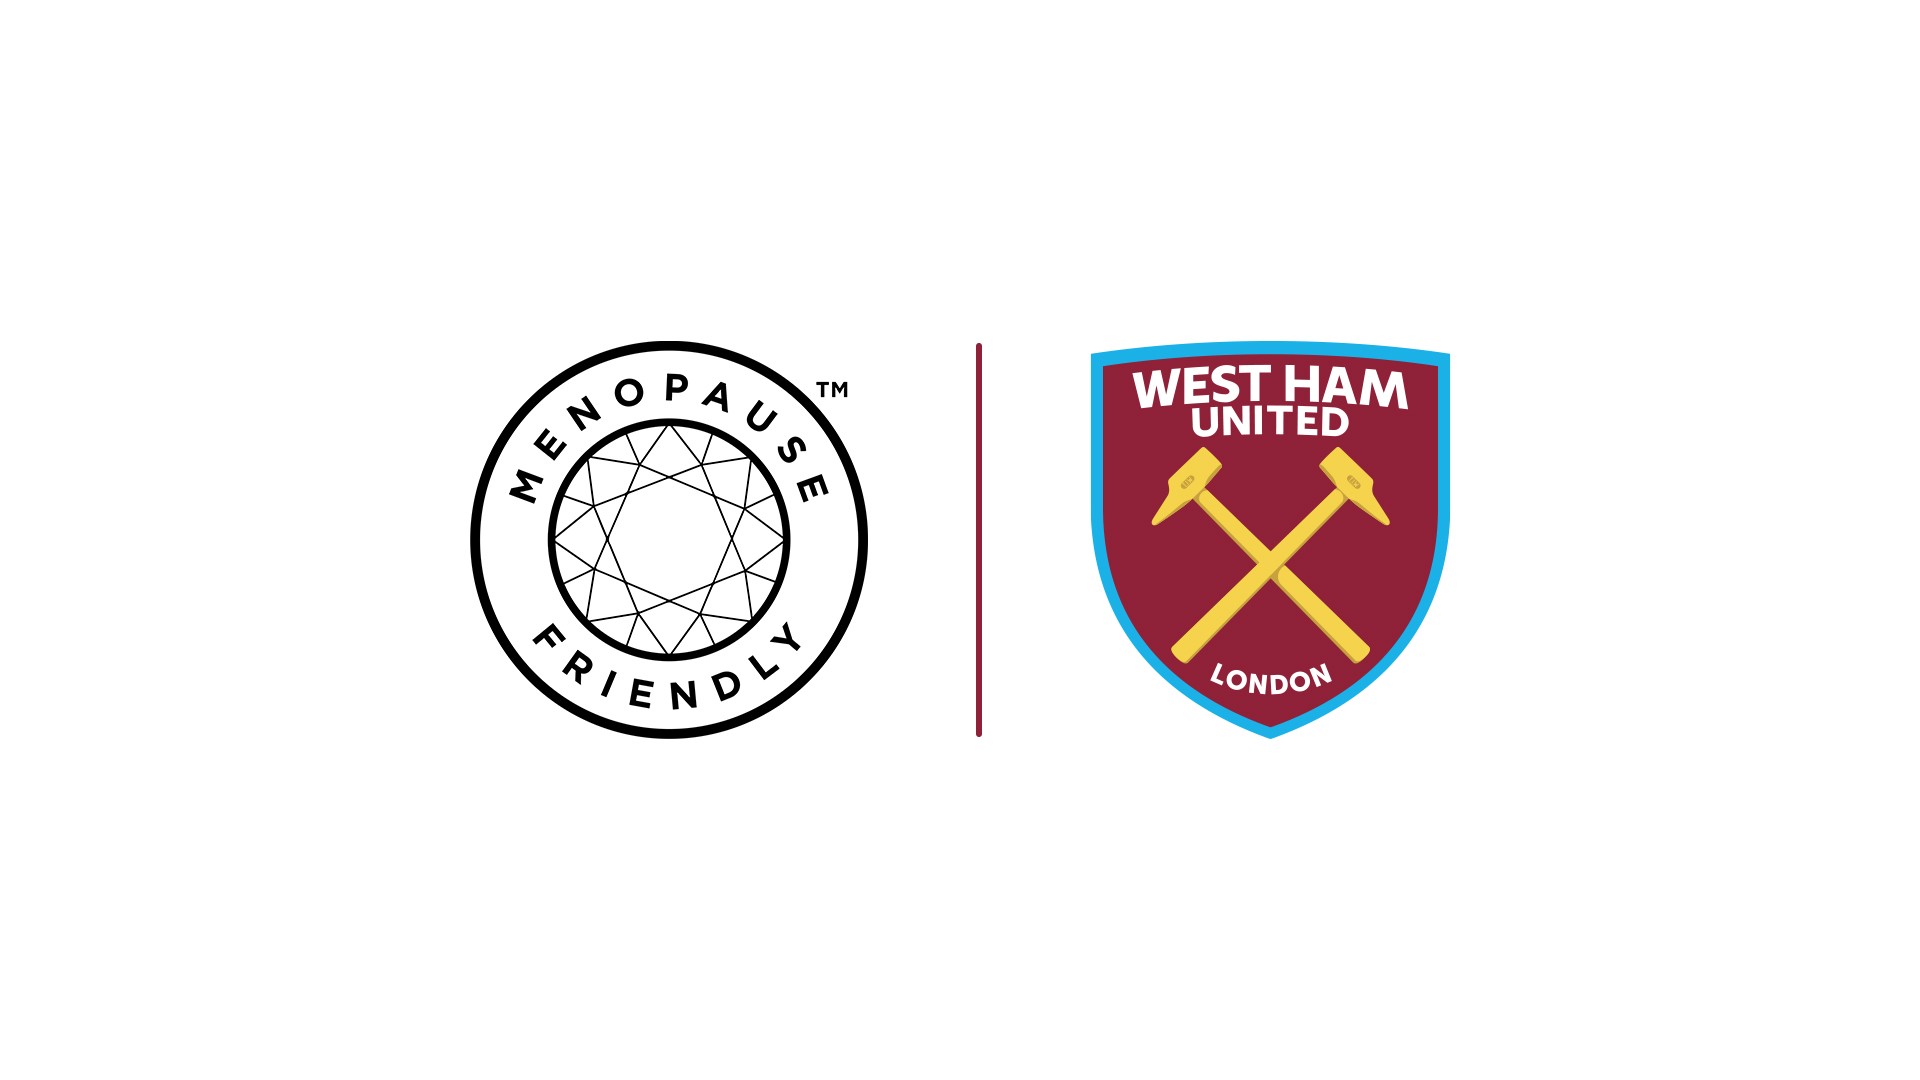 West Ham United and Menopause friendly